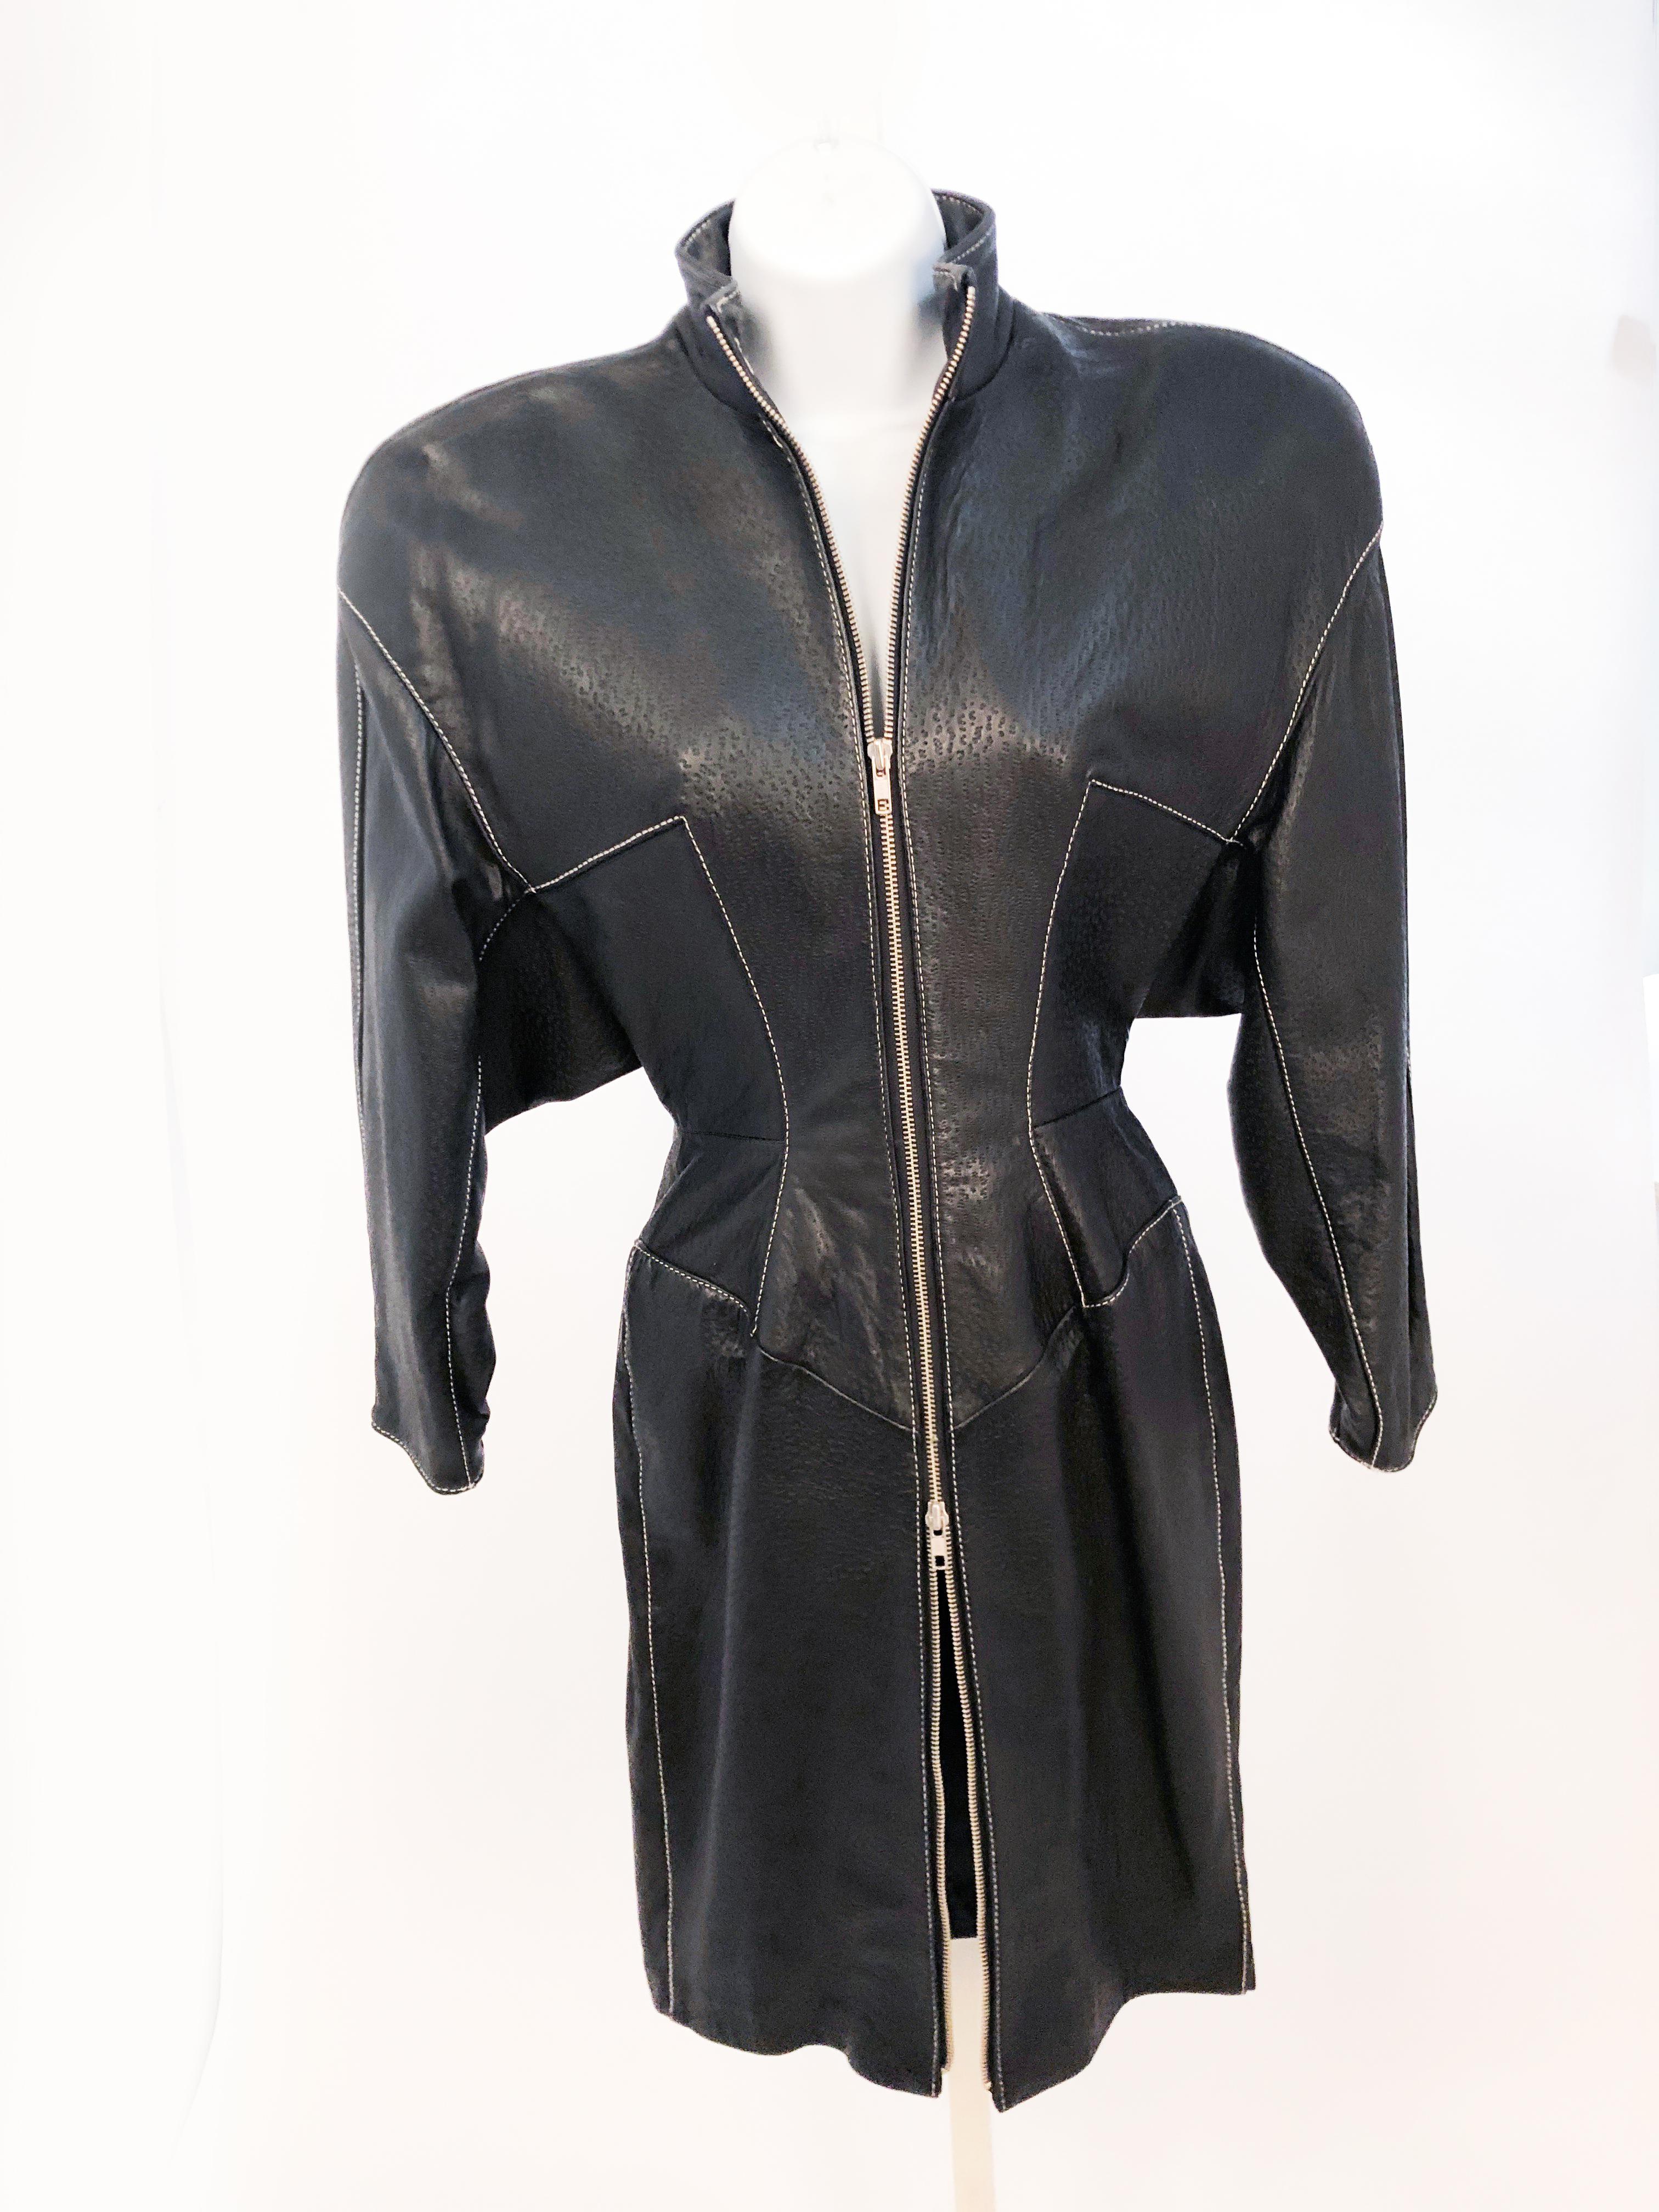 1980s North Beach Black Embossed Lamb Leather Dress with shoulder pads, contrast stitching, and a metal zipper closure along the entire face of the dress.